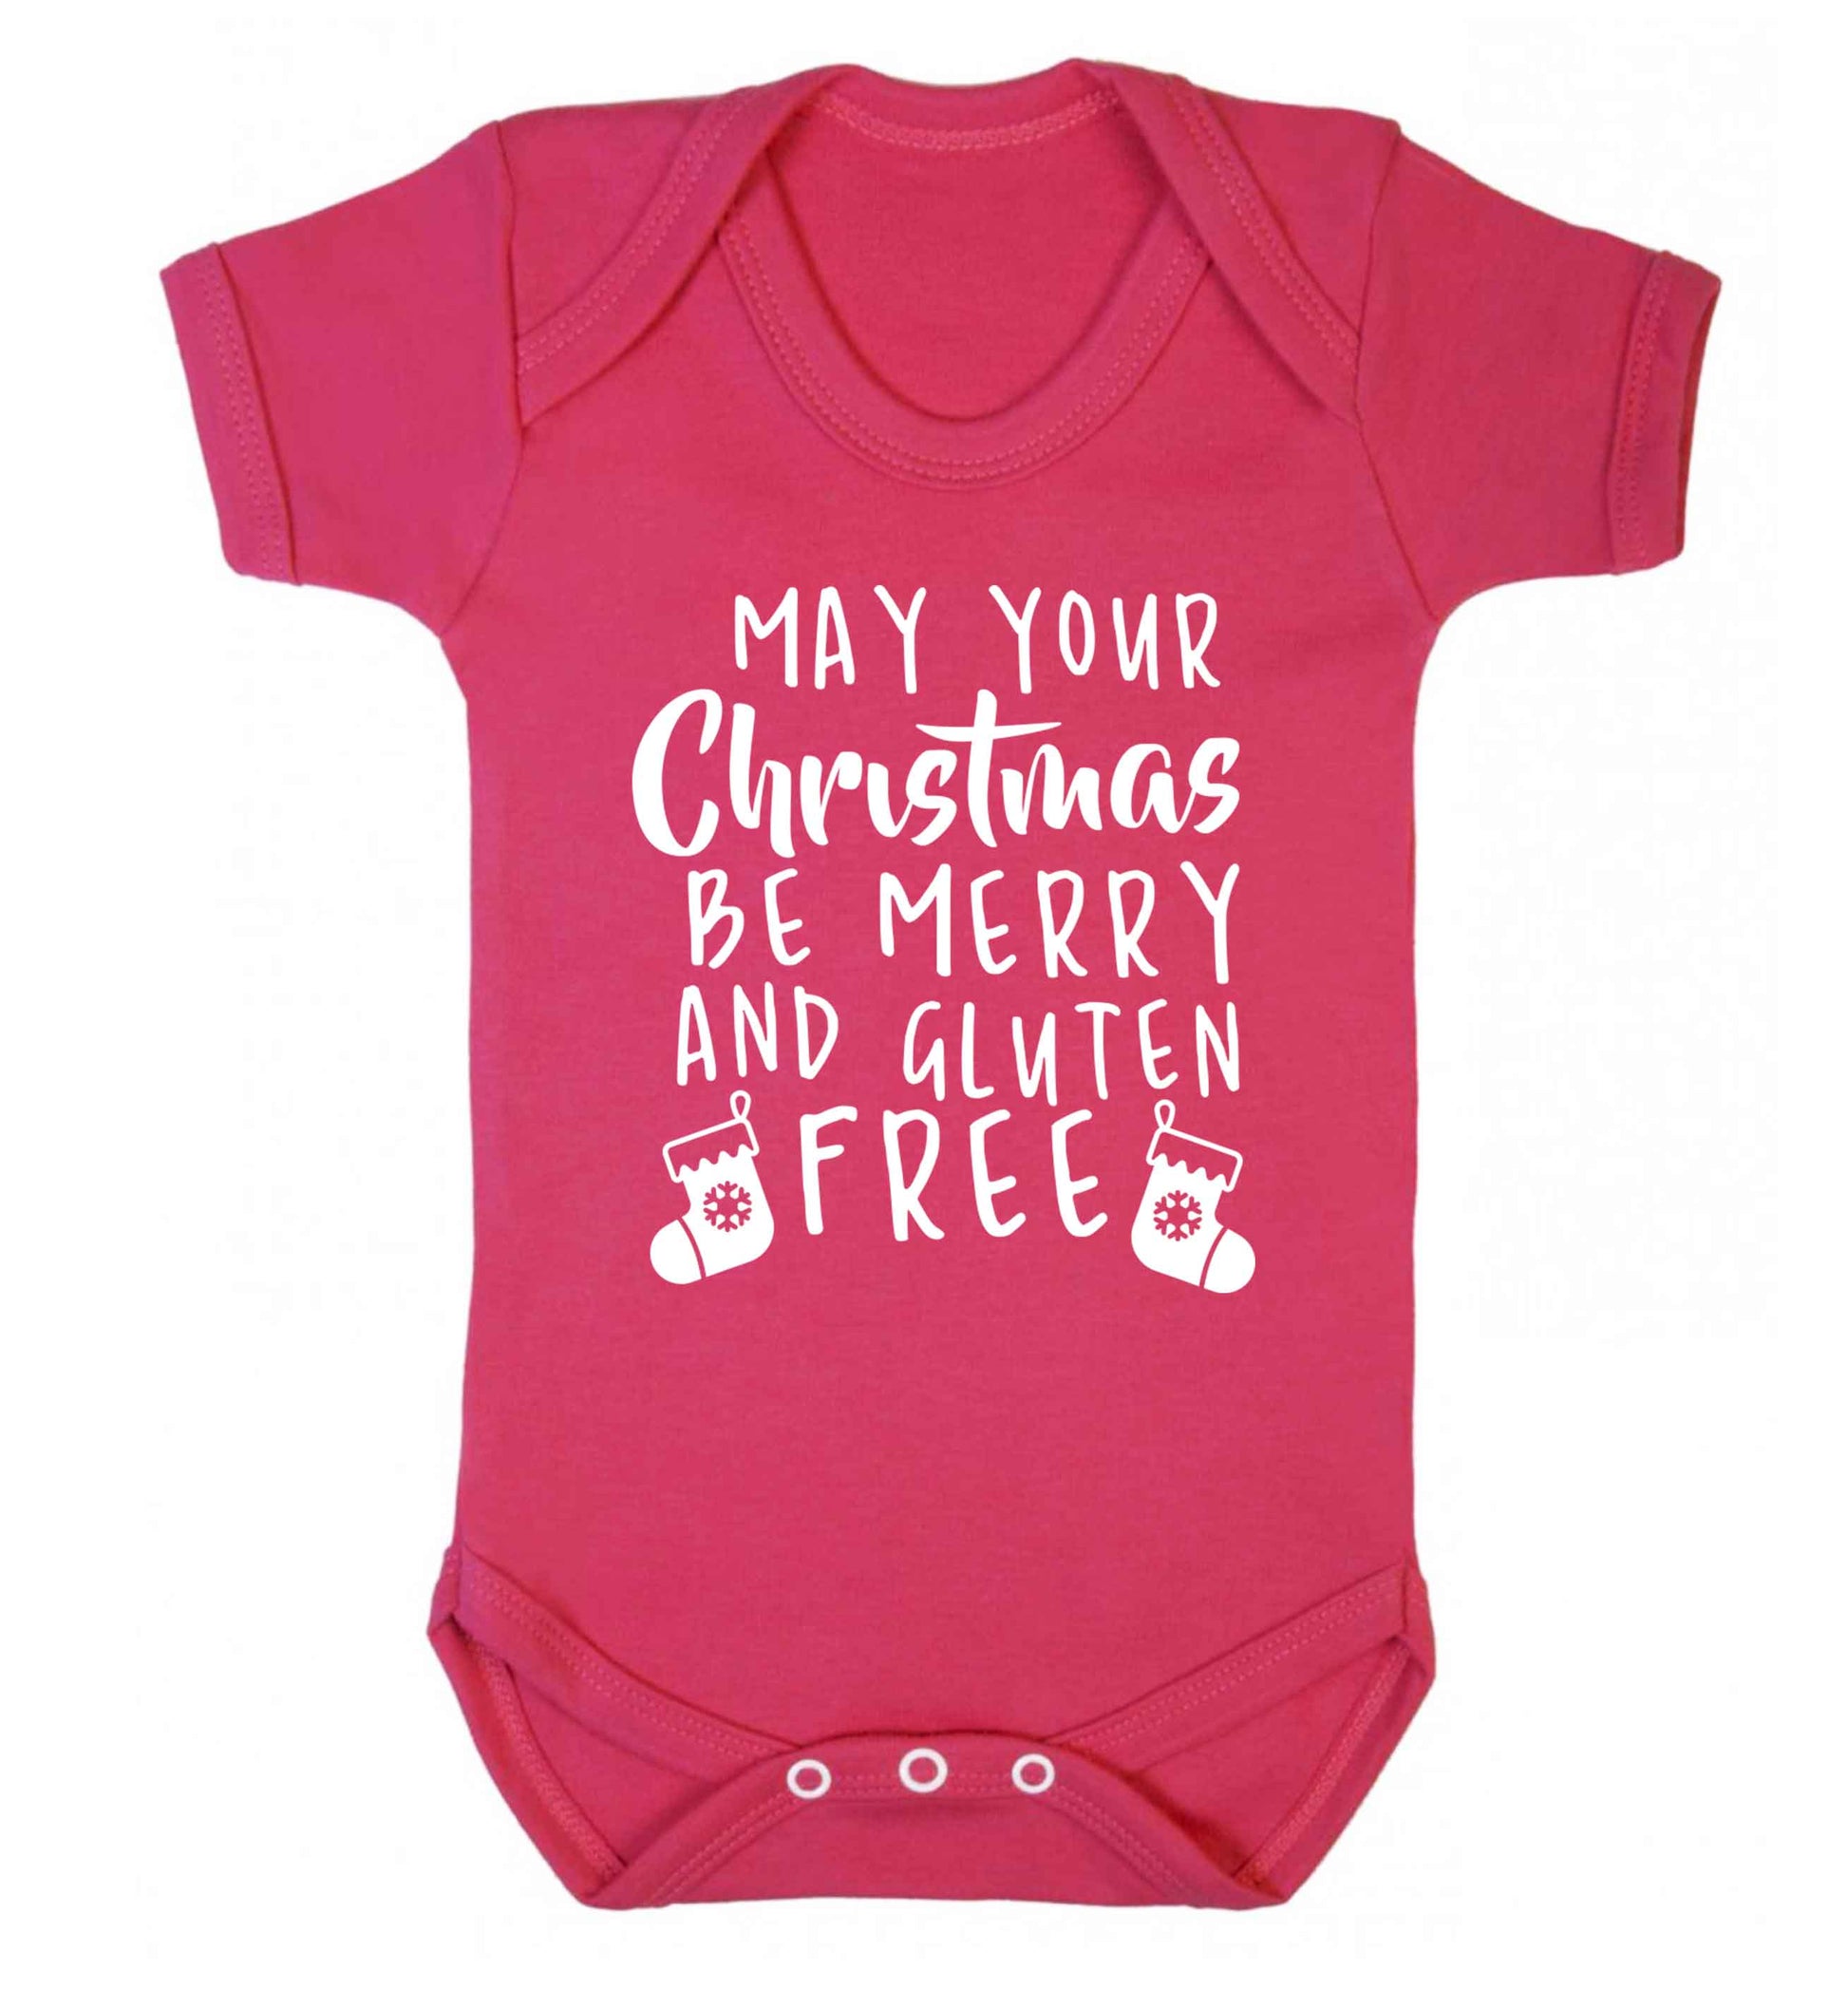 May your Christmas be merry and gluten free Baby Vest dark pink 18-24 months